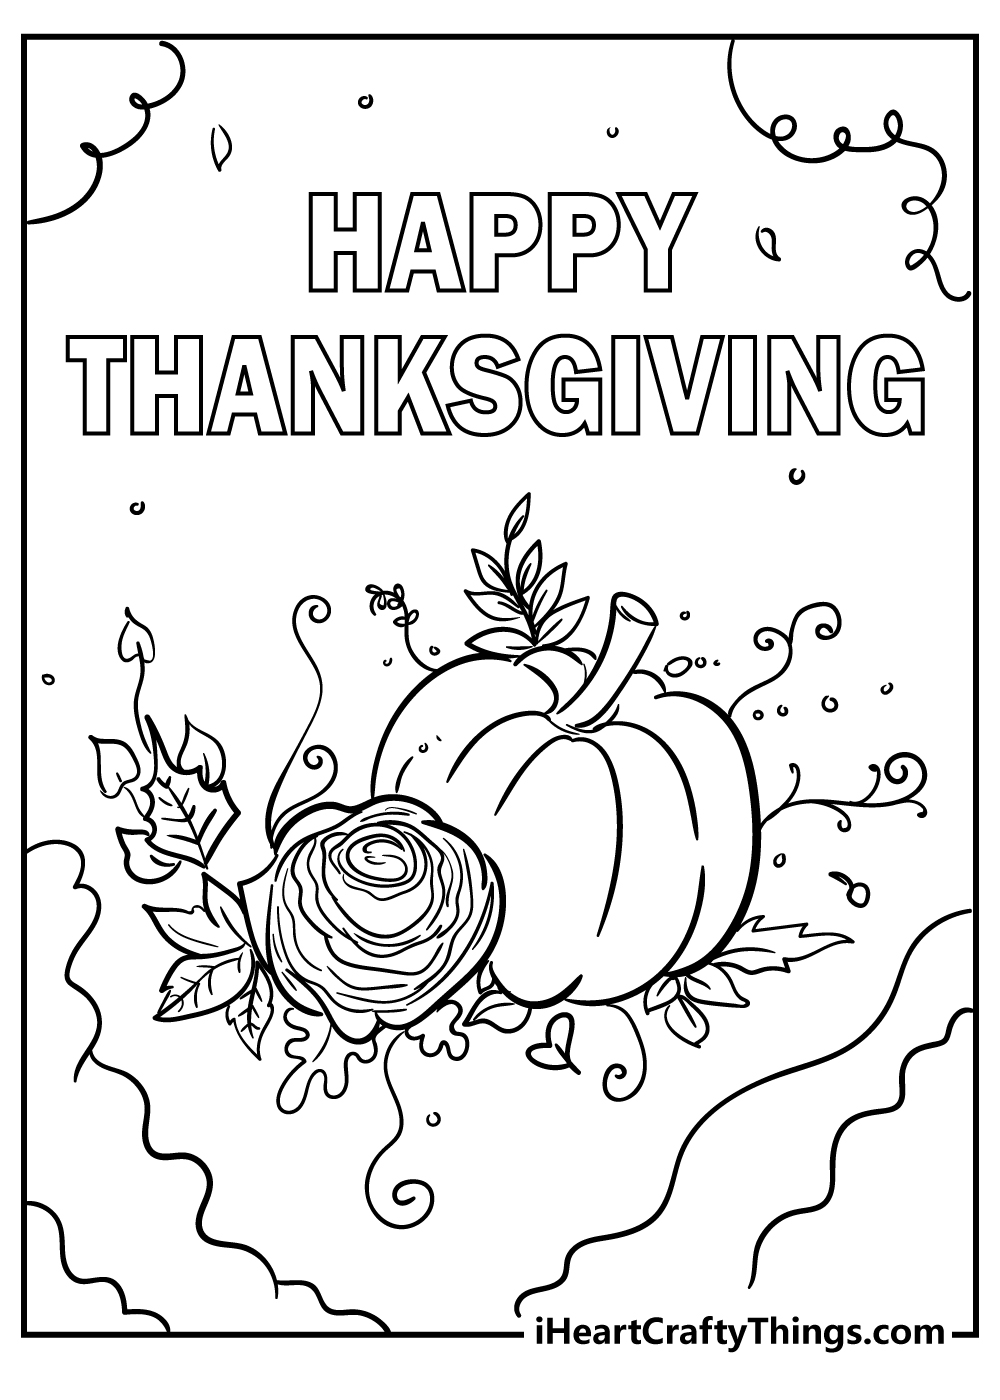 Thanksgiving Turkey Coloring Pages free printable